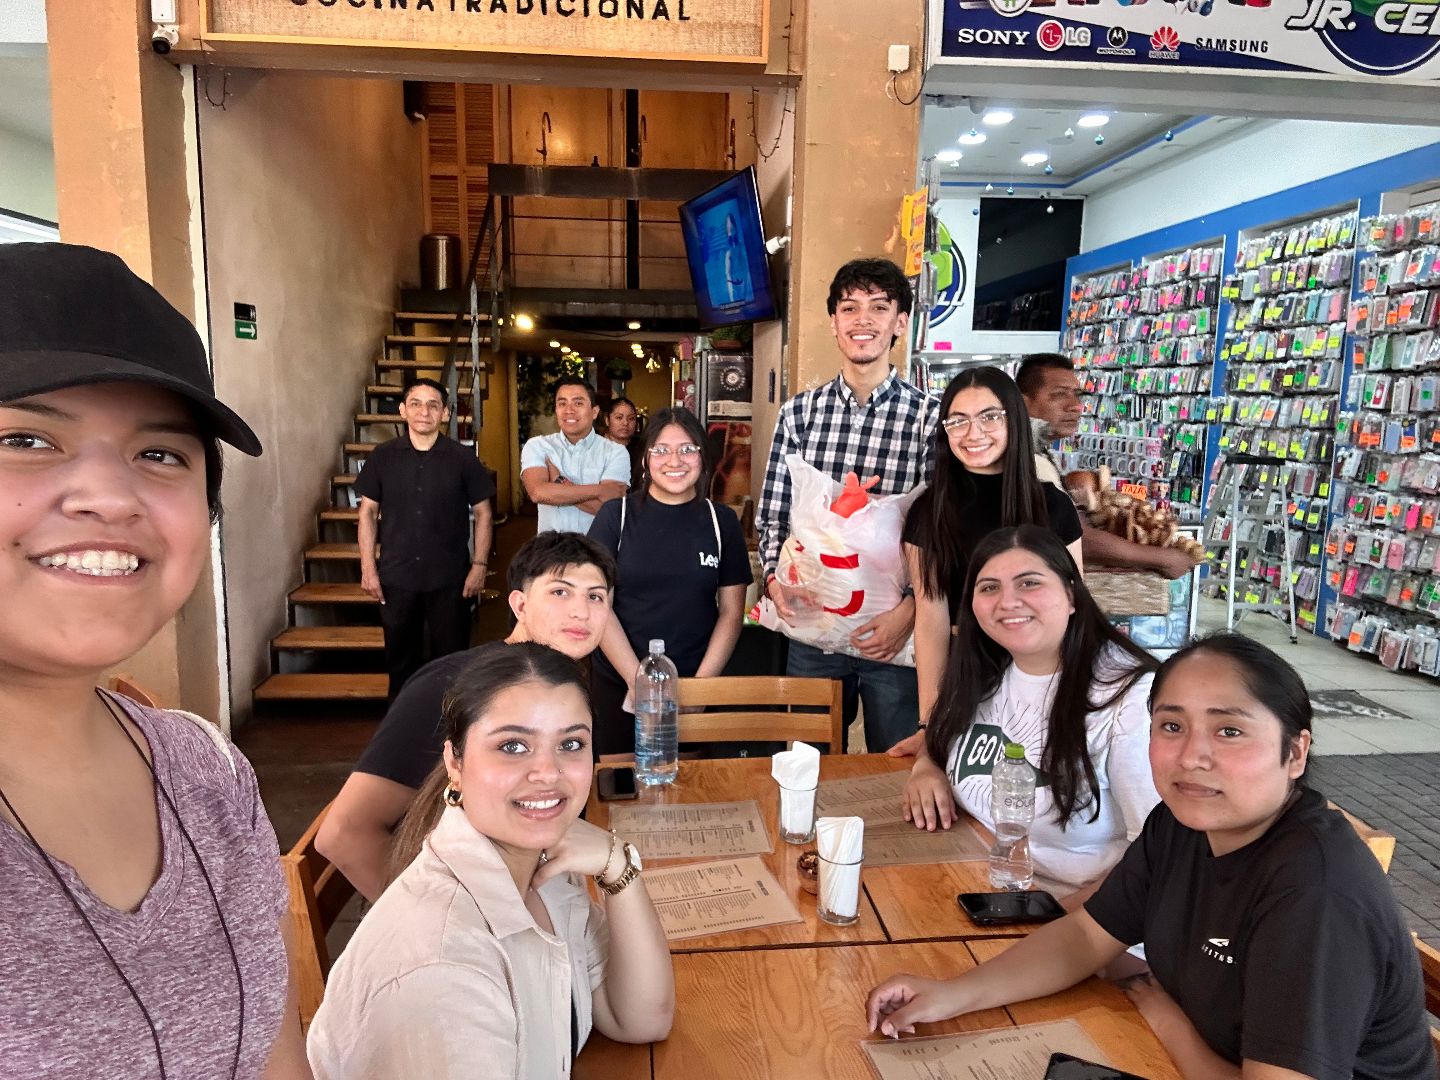 Group of students at a local restaraunt in Mexico